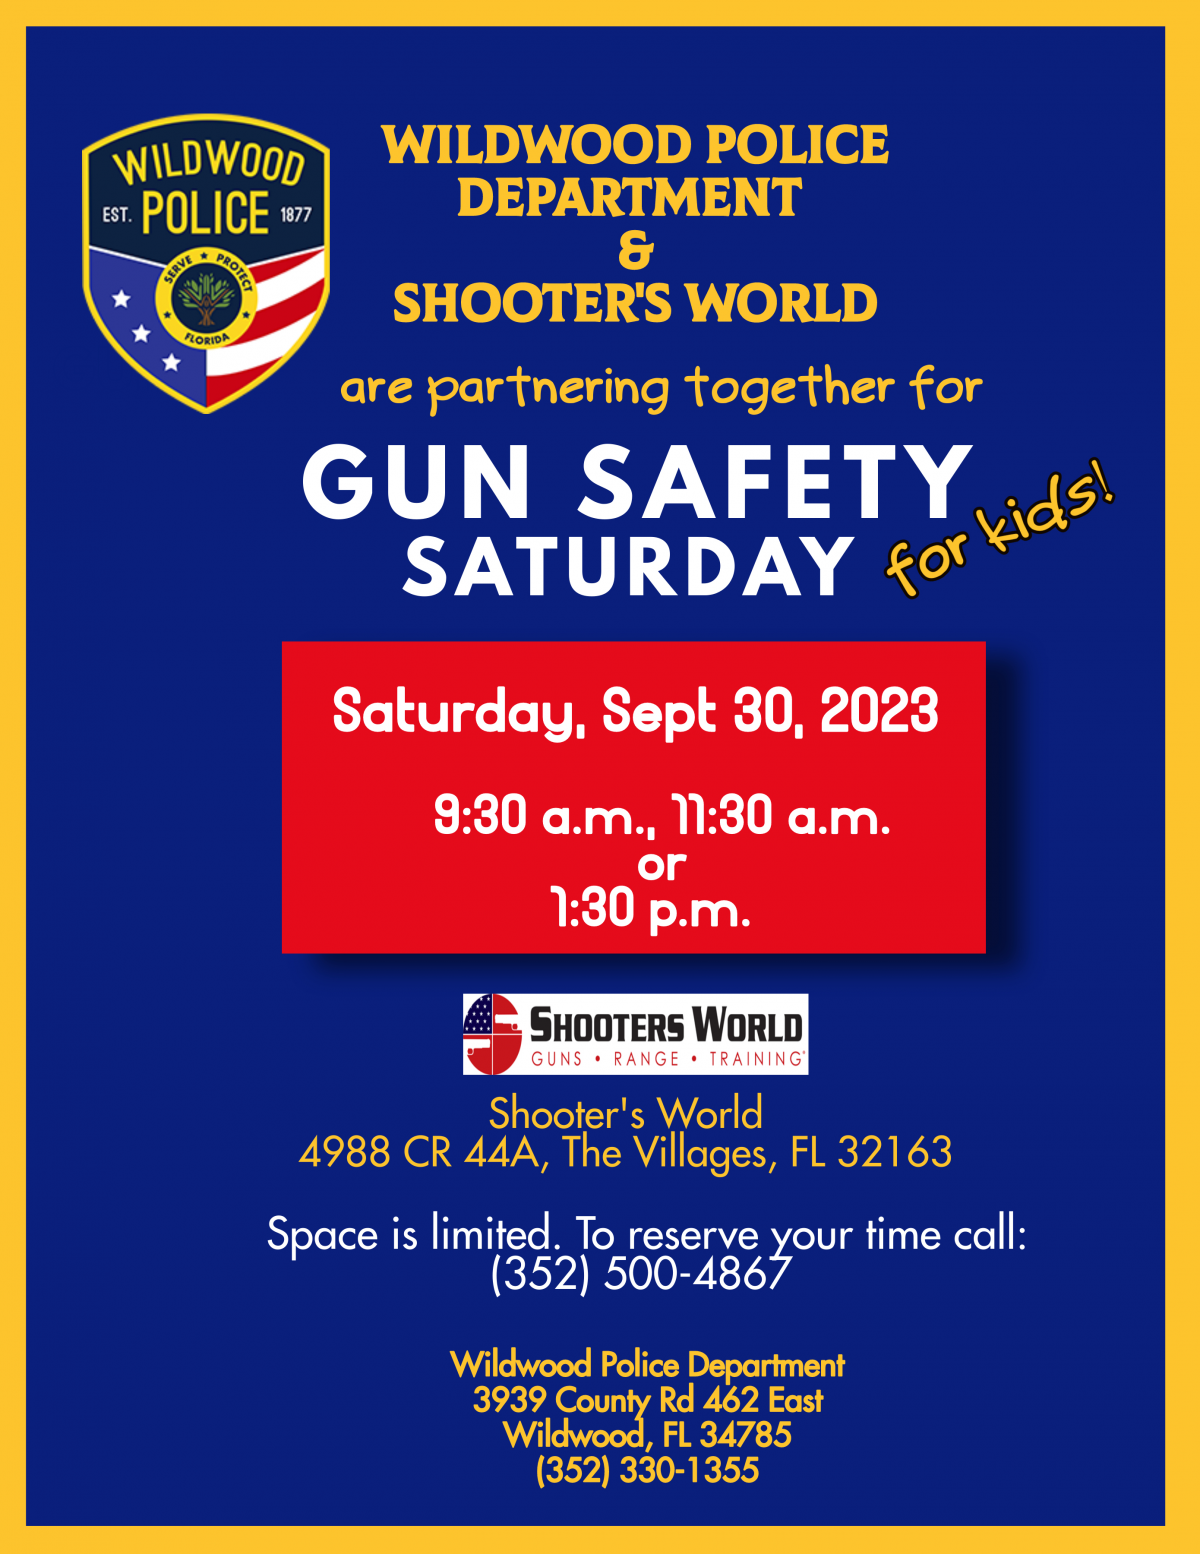 Wildwood Police Department & Shooter's World Gun Safety Saturday - for kids! 09/30/23 